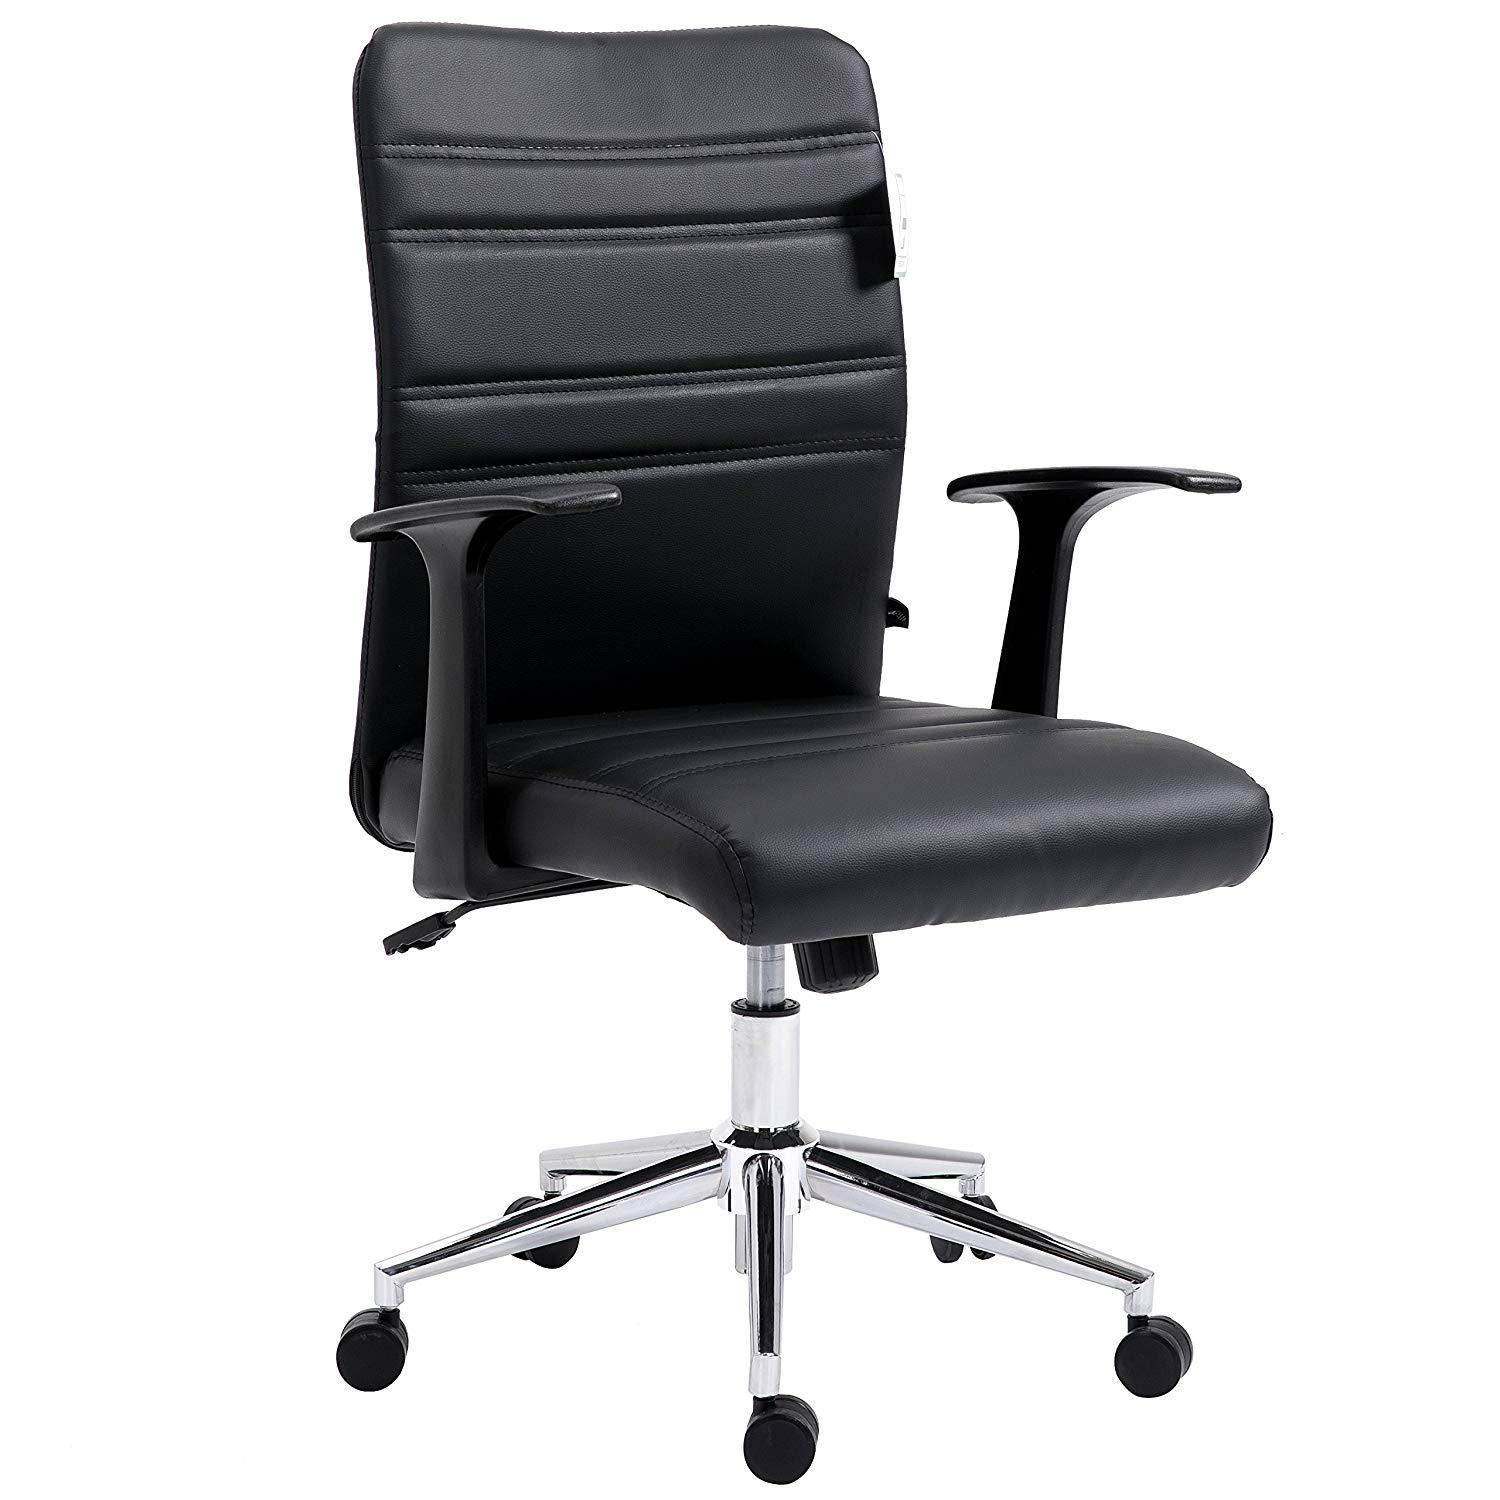 PU Leather Padded Medium Back Swivel Office Chair with Chrome Base, Black